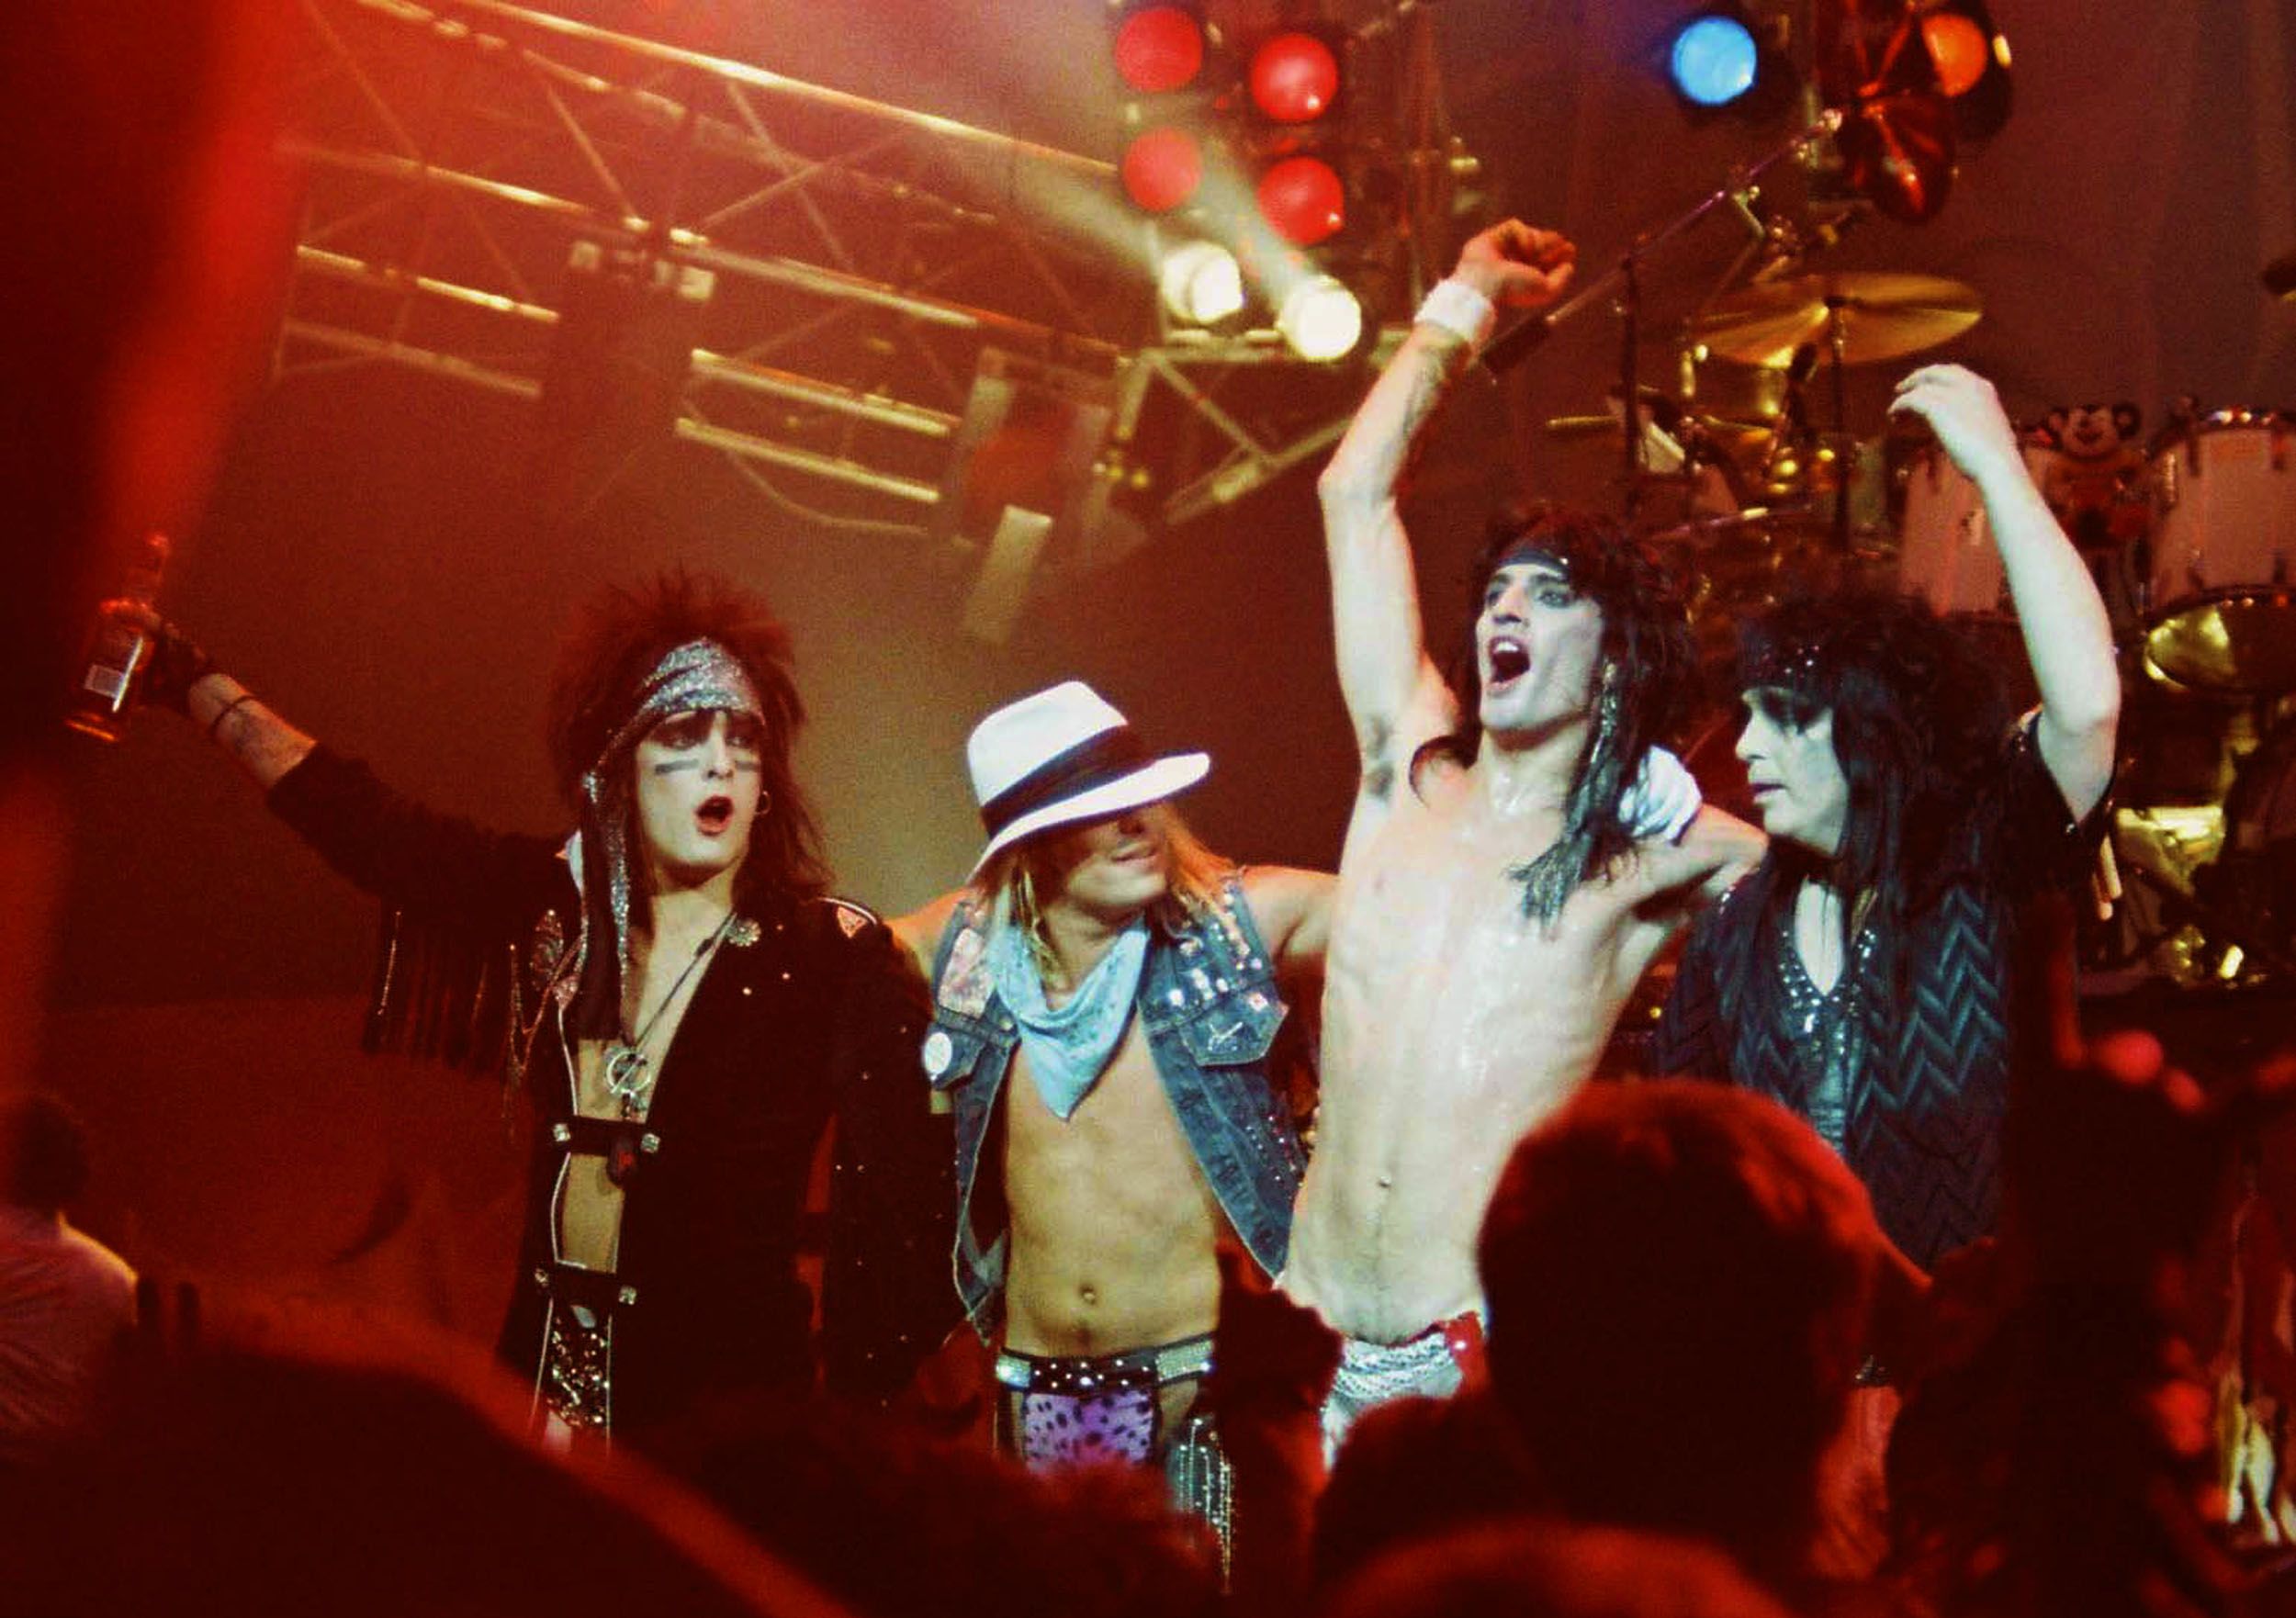 Motley Crue Photos - Pictures of Motley Crue Partying and Playing